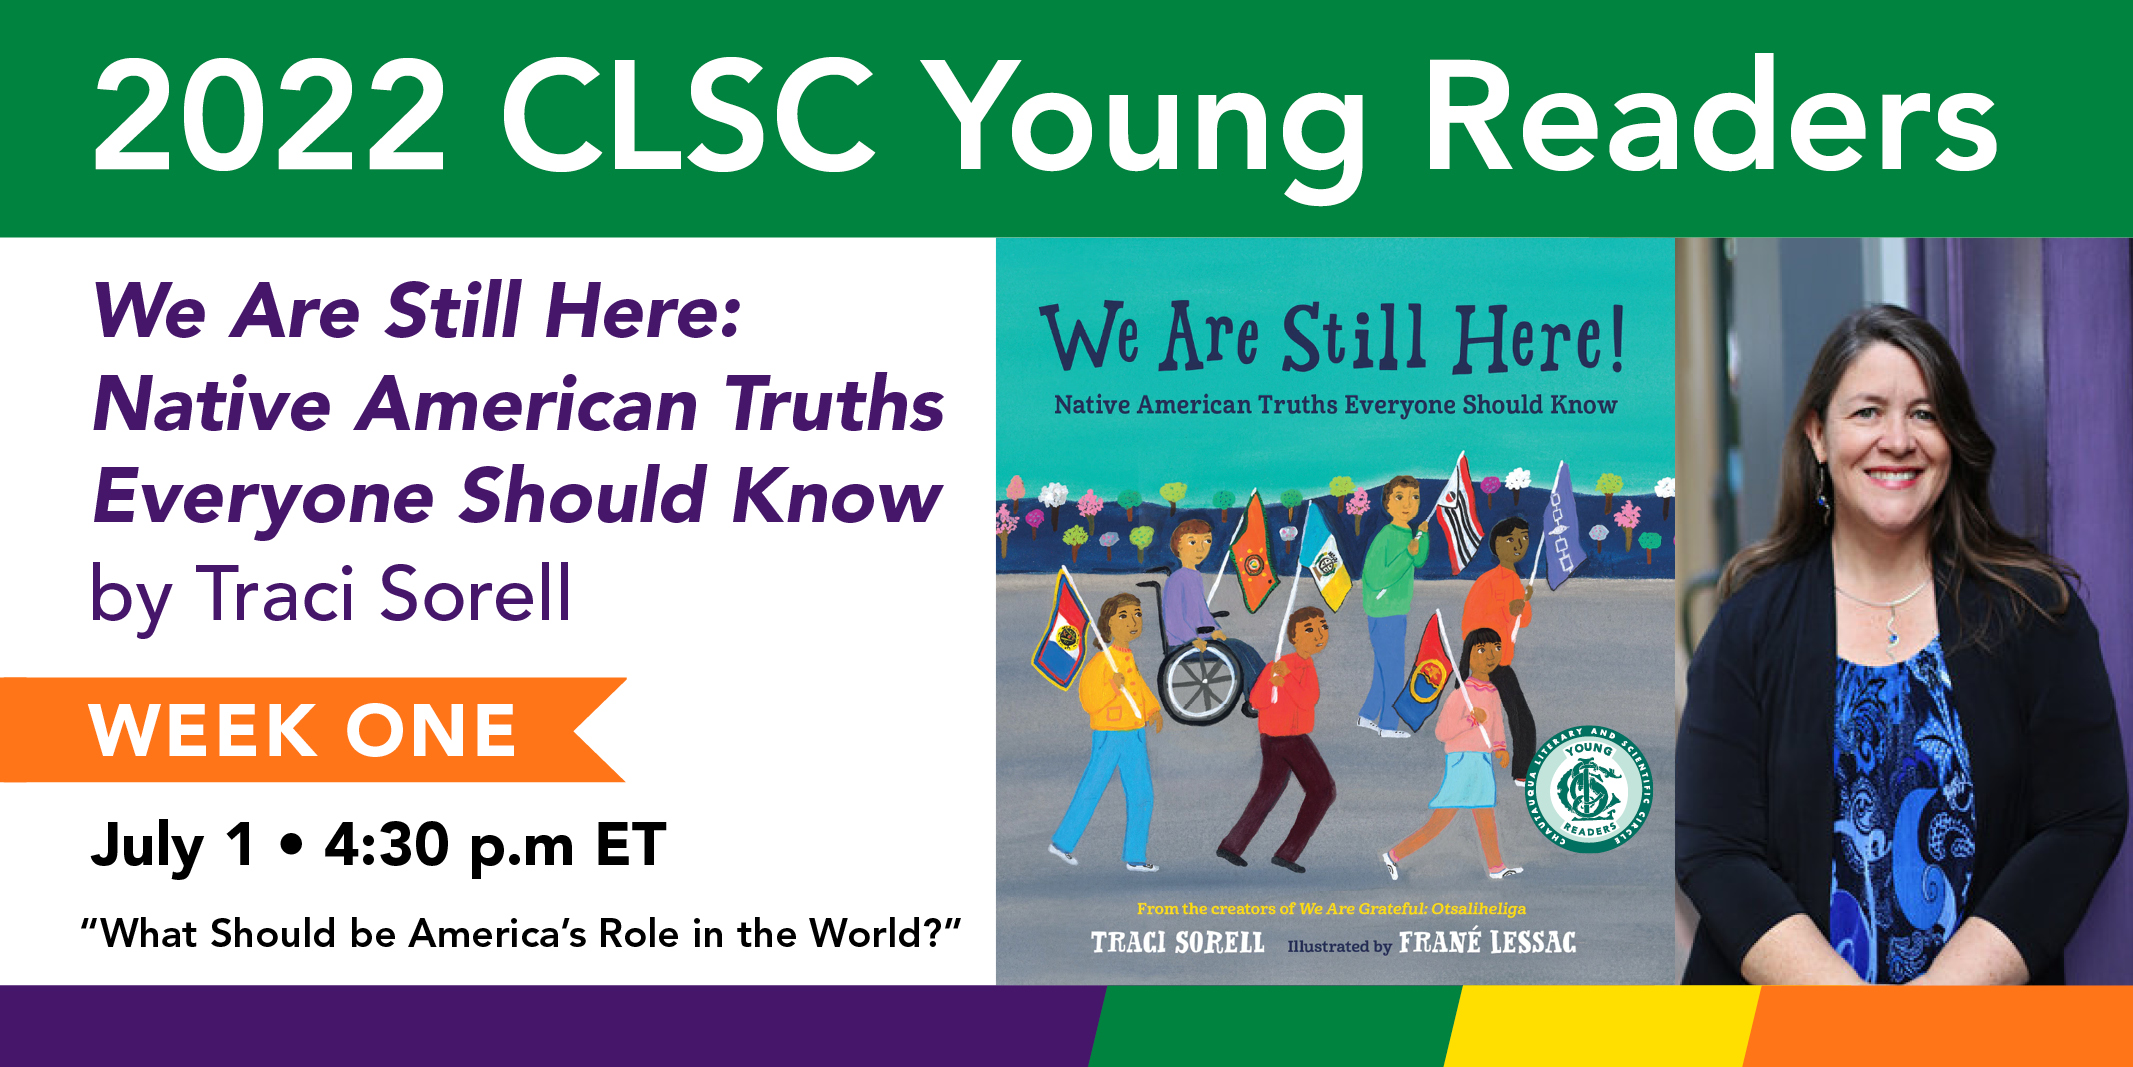 image: "We Are Sill Here" Traci Sorell 2022 CLSC Young Reader event banner (Week 1 July 1 4:30 ET)